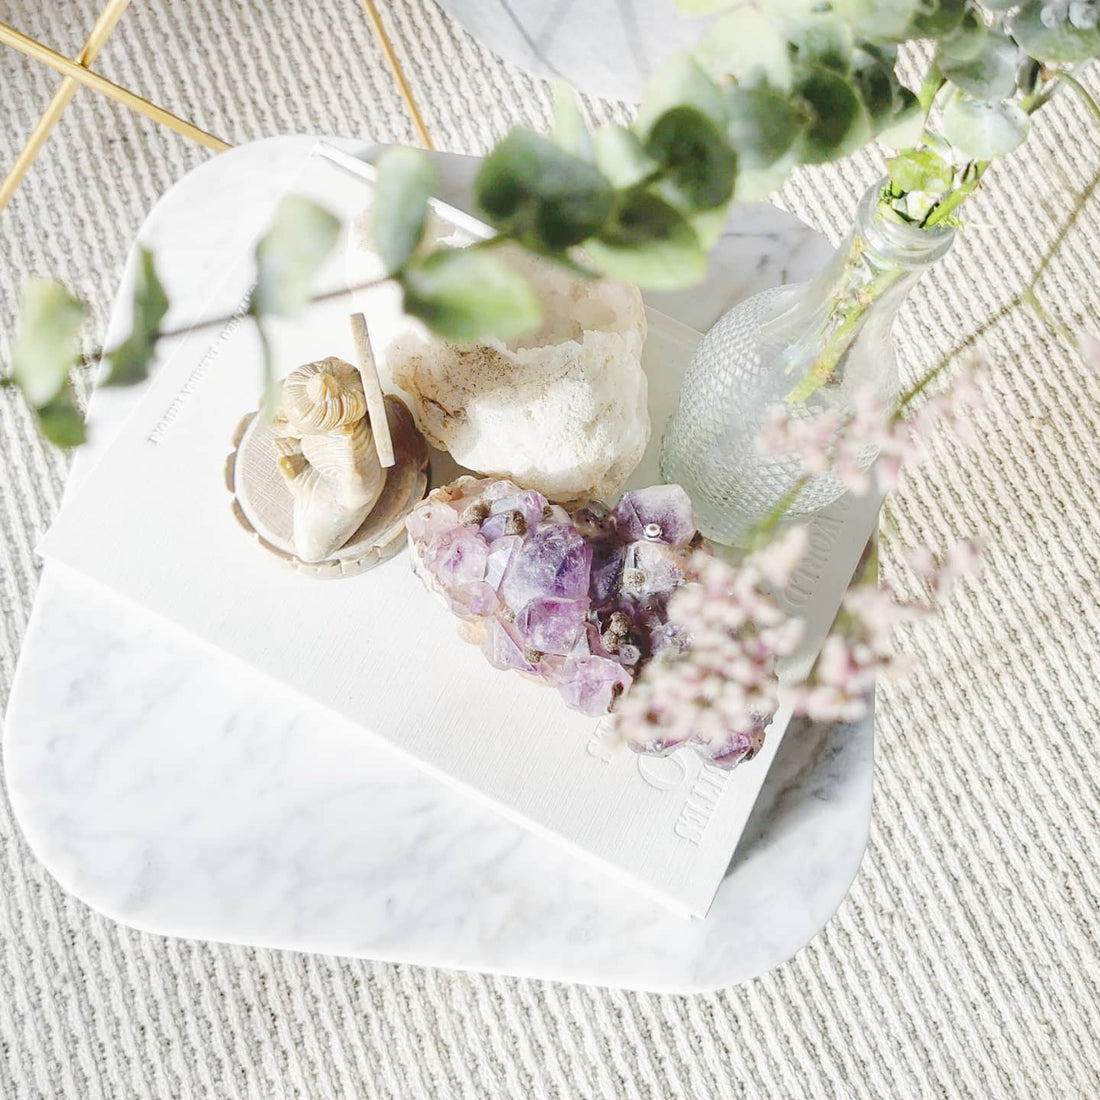 INTRODUCTION TO CRYSTAL HEALING